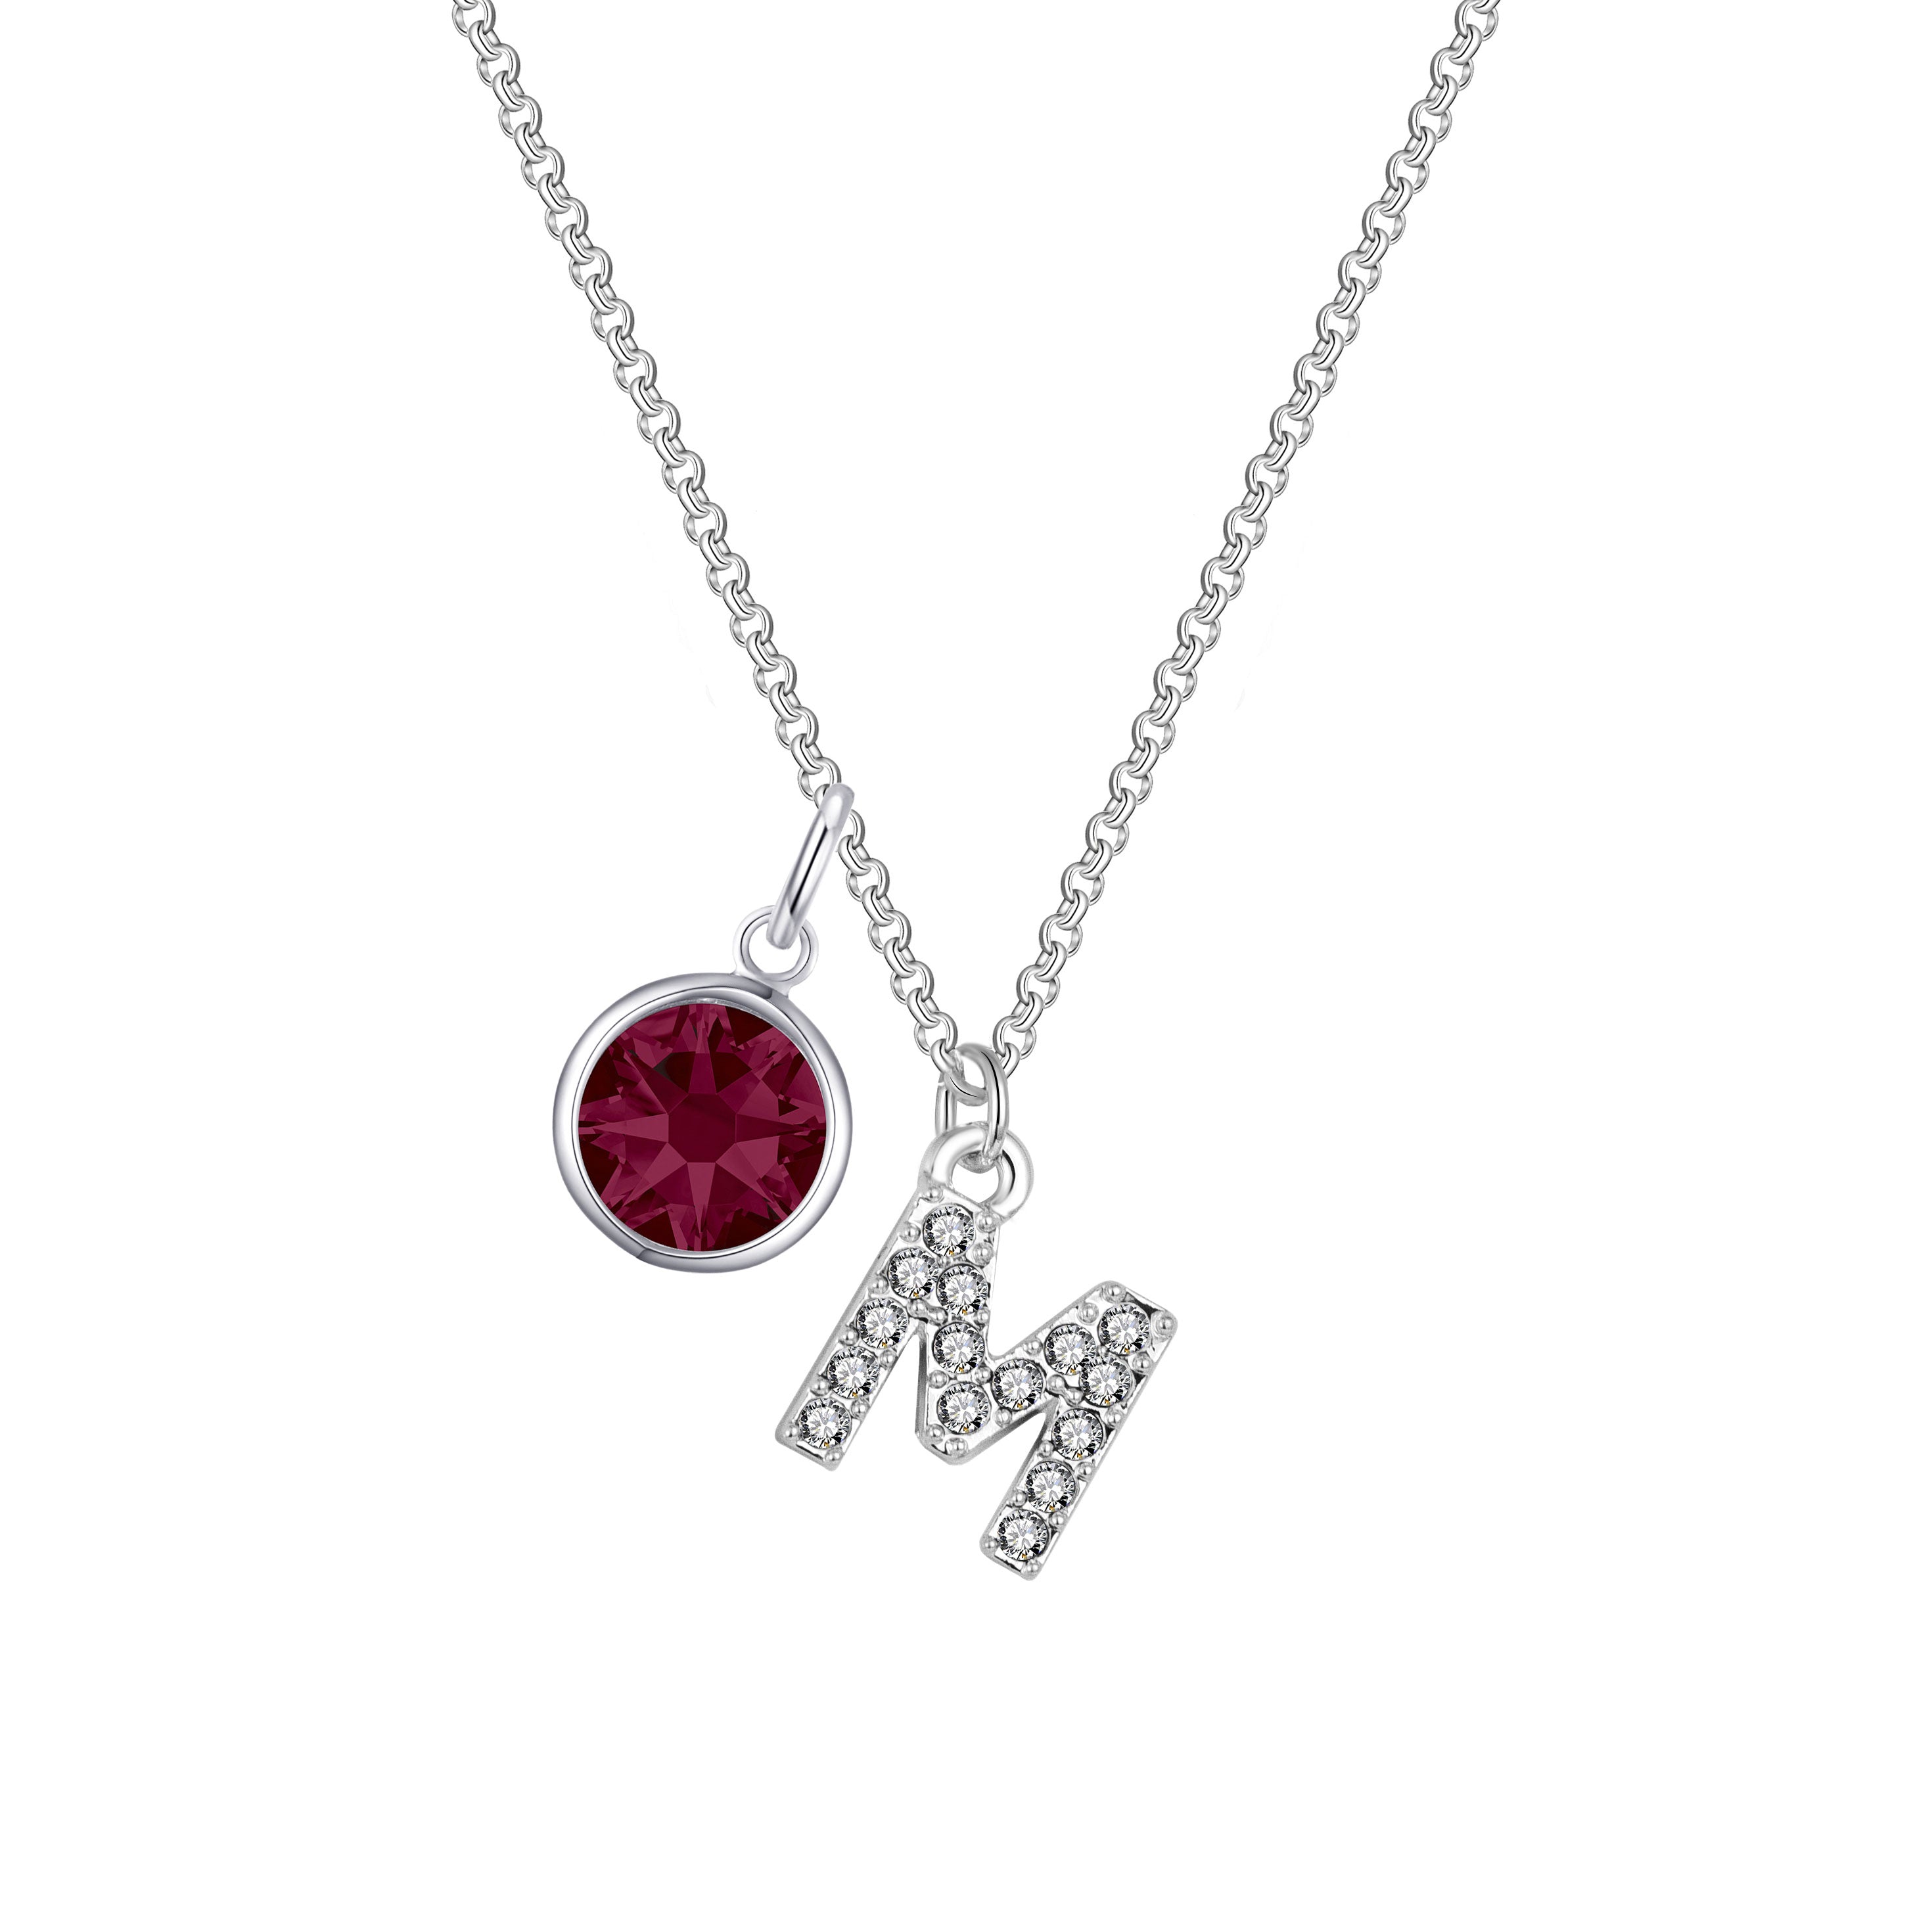 Birthstone Pave Initial Necklace Letter M Created with Zircondia® Crystals